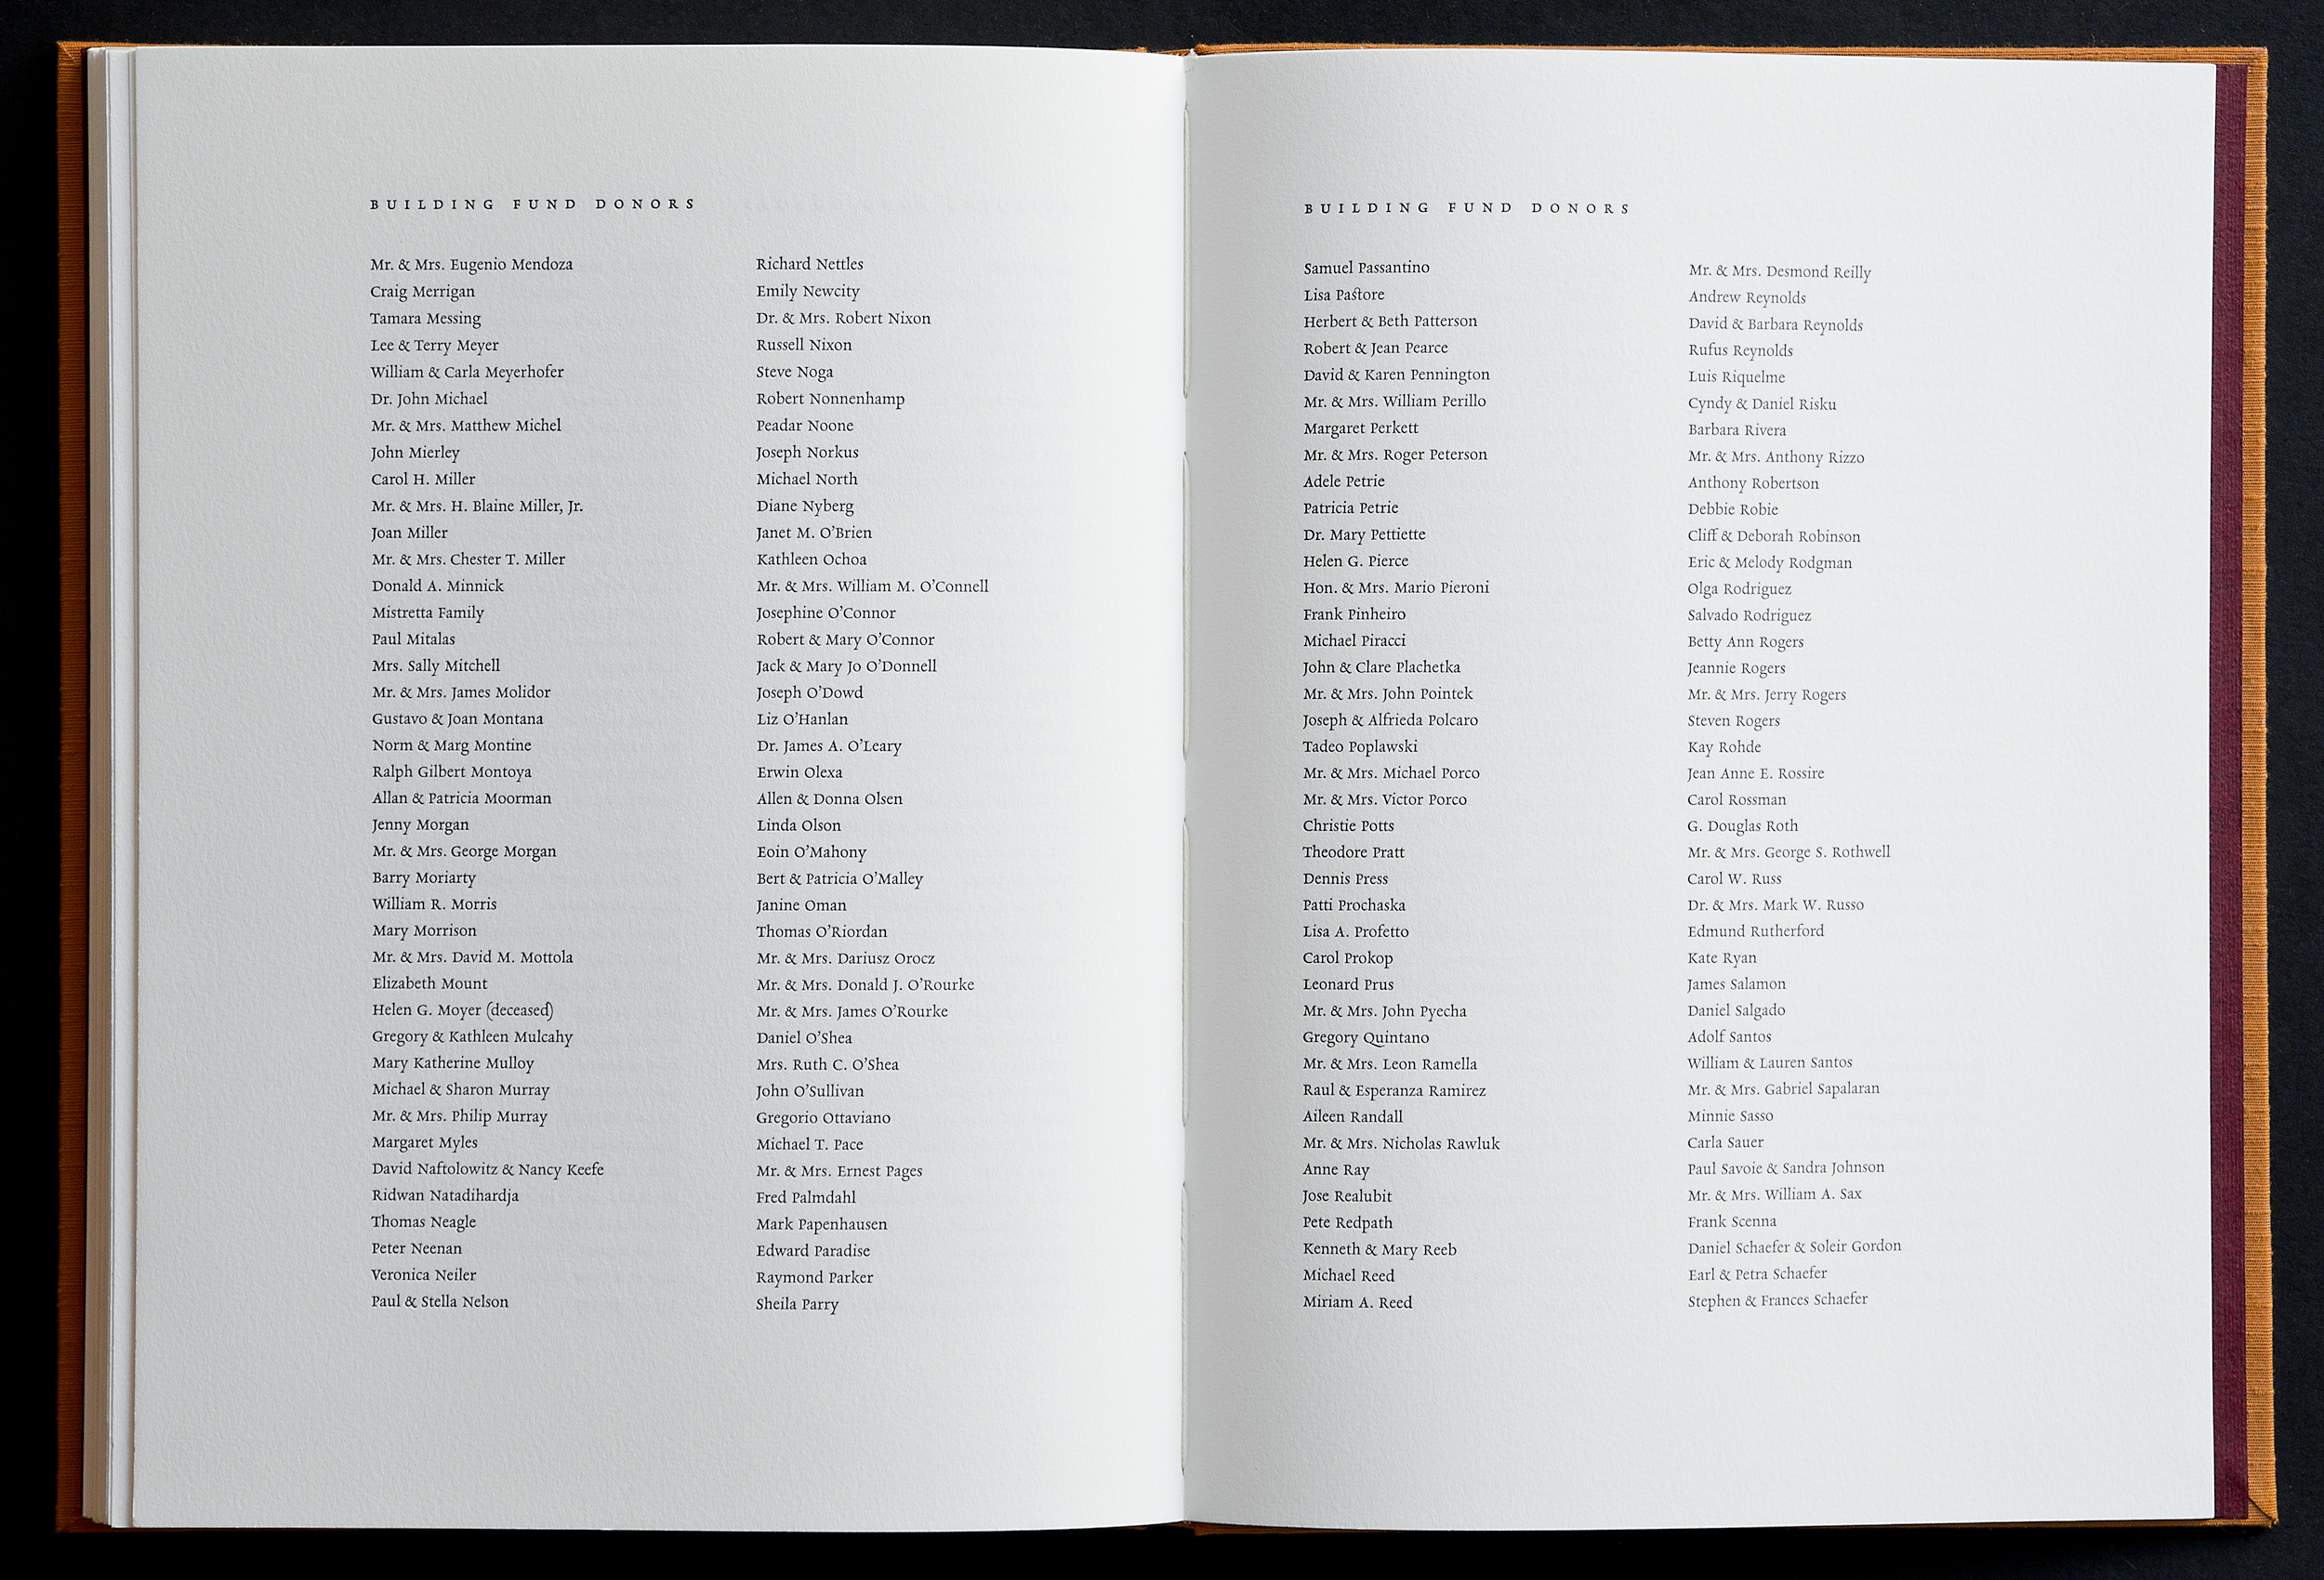  The back of the book features an alphabetical listing of the church donors. 